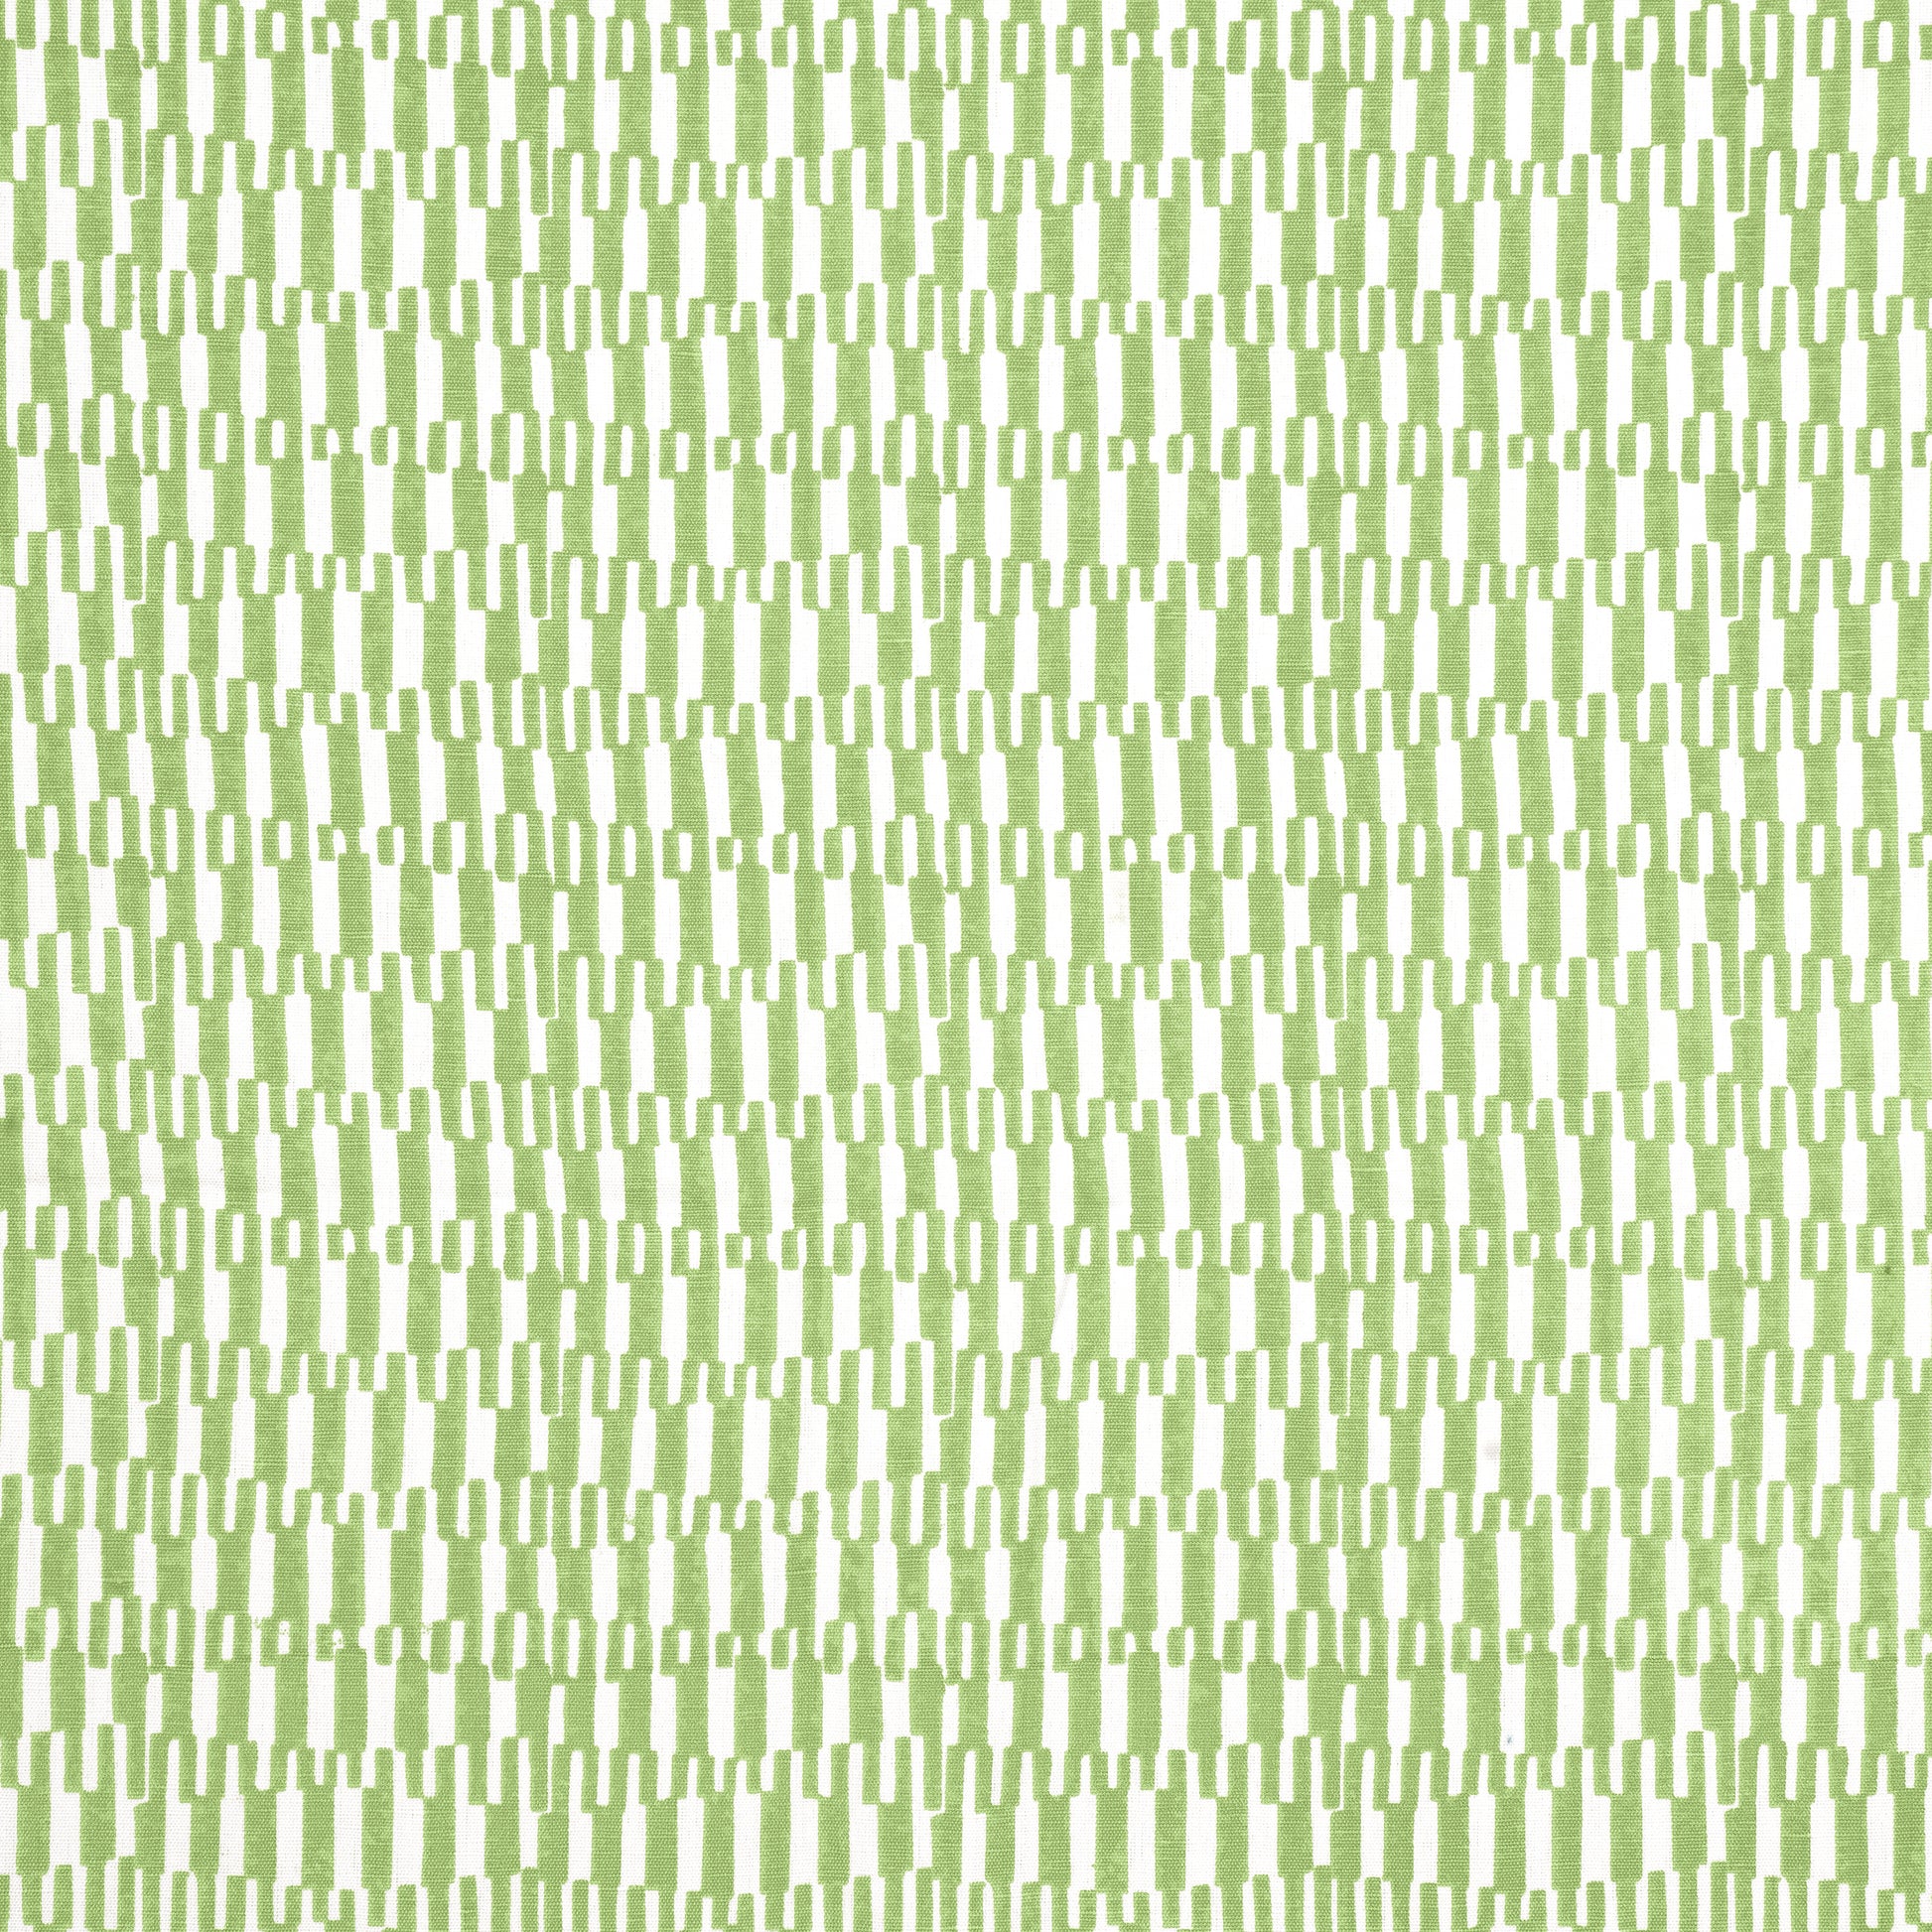 Purchase Thibaut Fabric SKU# F920800 pattern name Gogo color Parrot Green